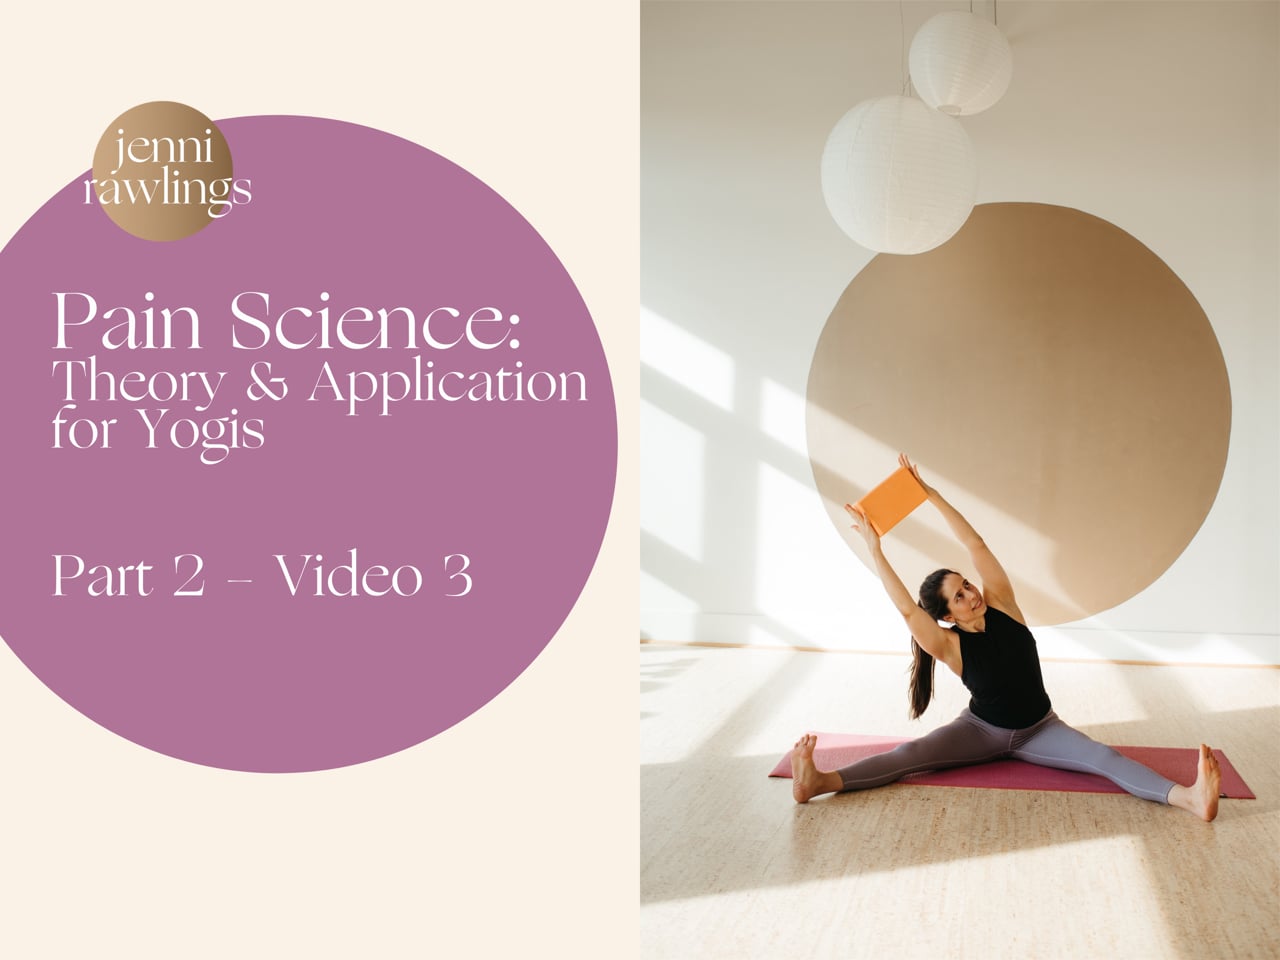 Pain Science for Yogis Part 2, Video 3